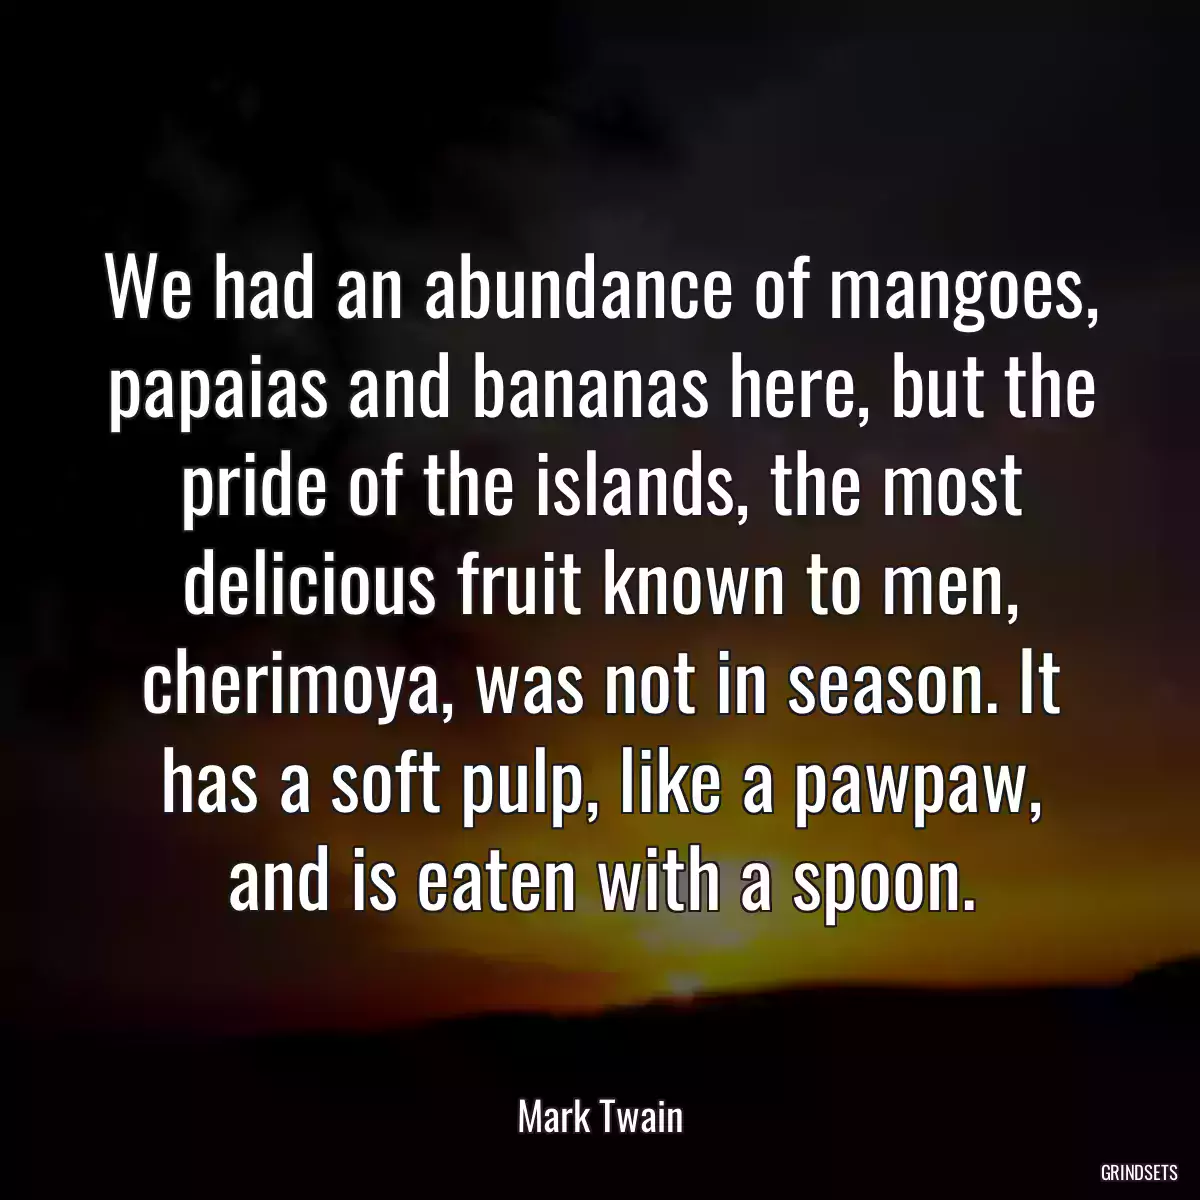 We had an abundance of mangoes, papaias and bananas here, but the pride of the islands, the most delicious fruit known to men, cherimoya, was not in season. It has a soft pulp, like a pawpaw, and is eaten with a spoon.